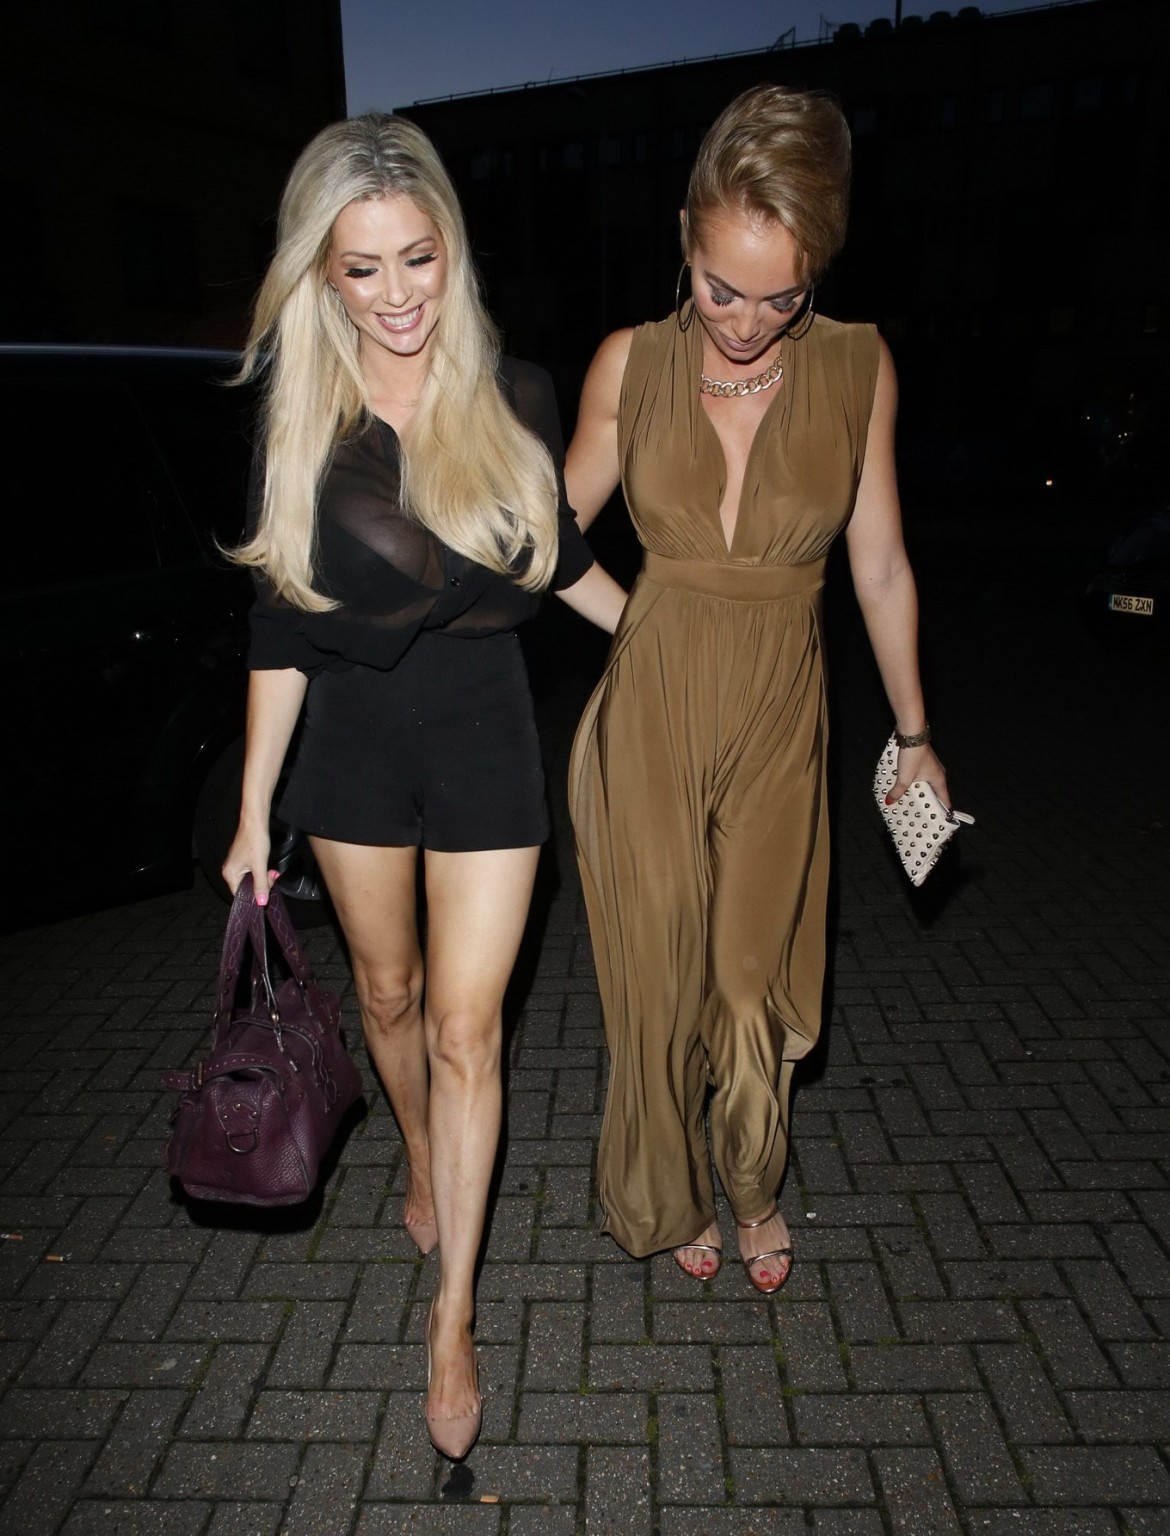 Nicola McLean leggy cthru to bra  making out with Aisleyne HorganWallace outside #75187139